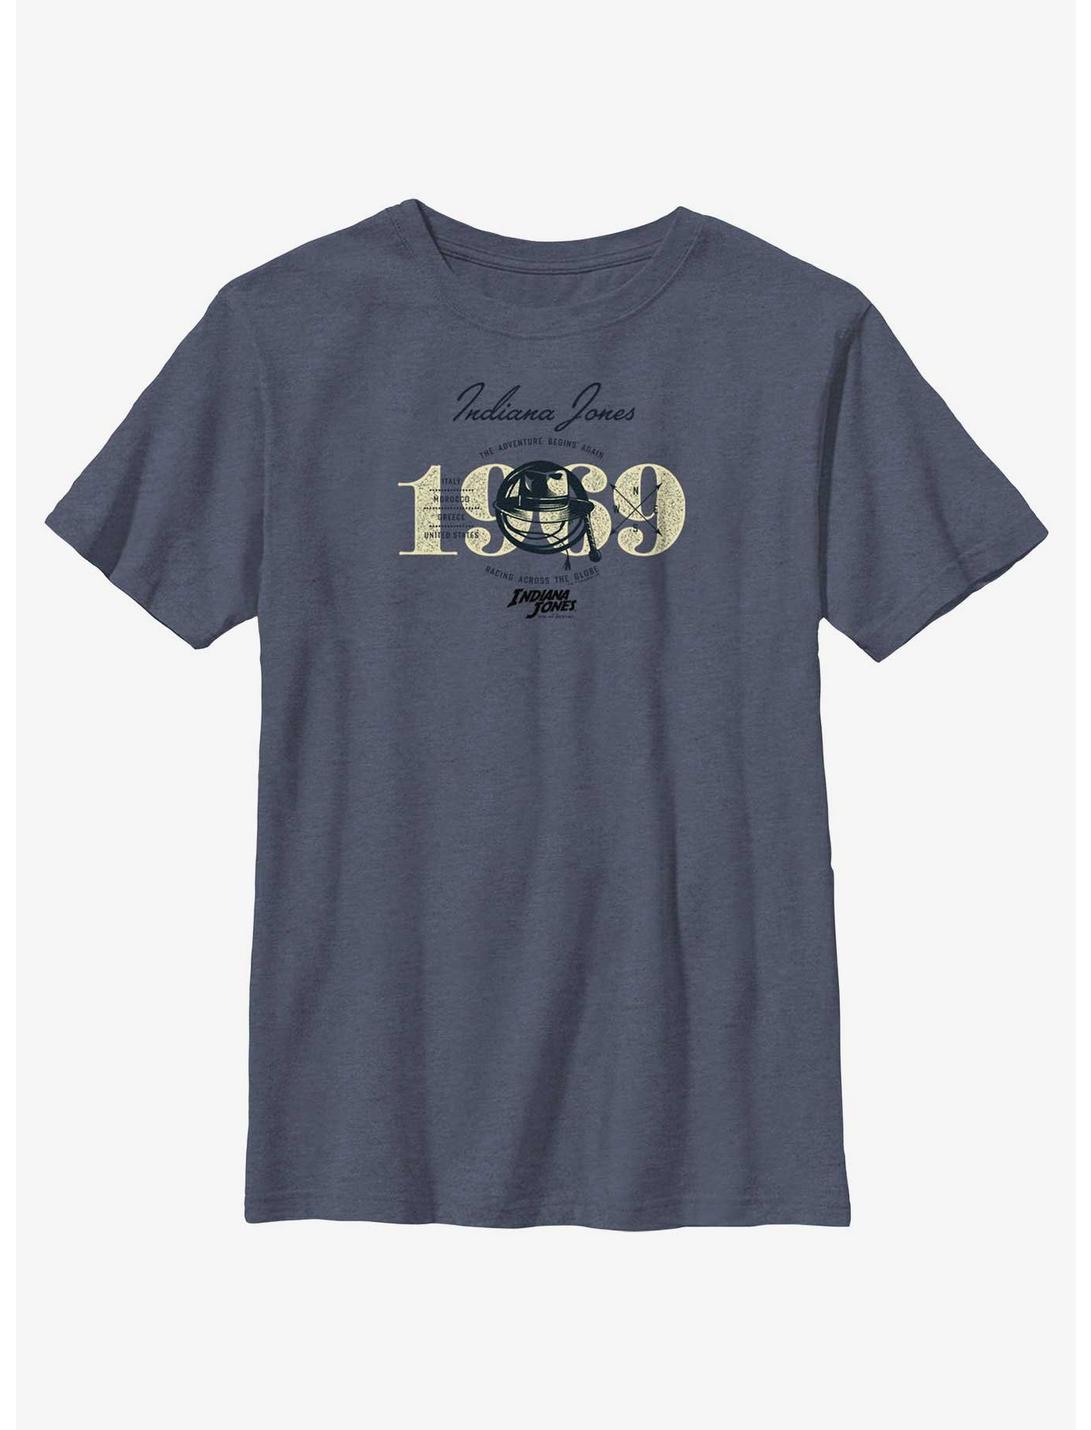 Indiana Jones and the Dial of Destiny 1969 Adventure Begins Again Youth T-Shirt, NAVY HTR, hi-res